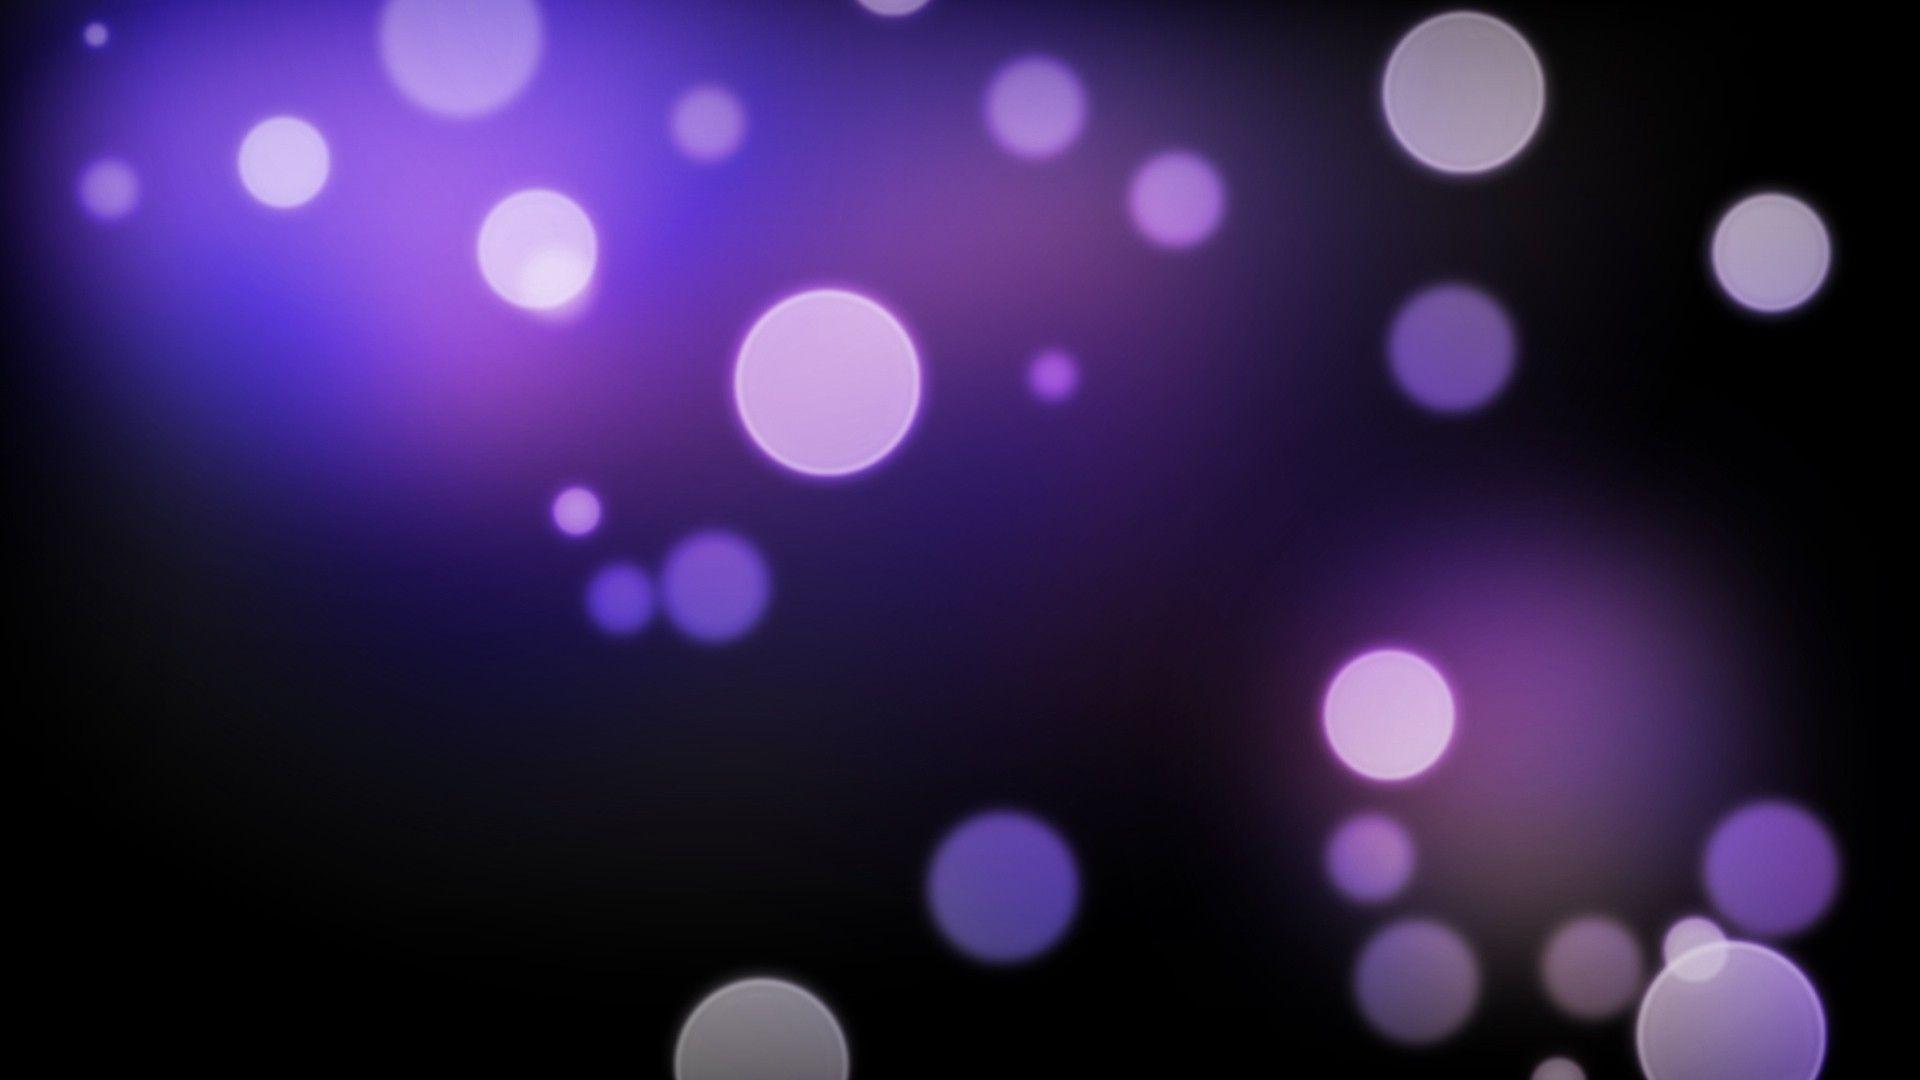 Wallpaper For > Solid Purple Background Tumblr